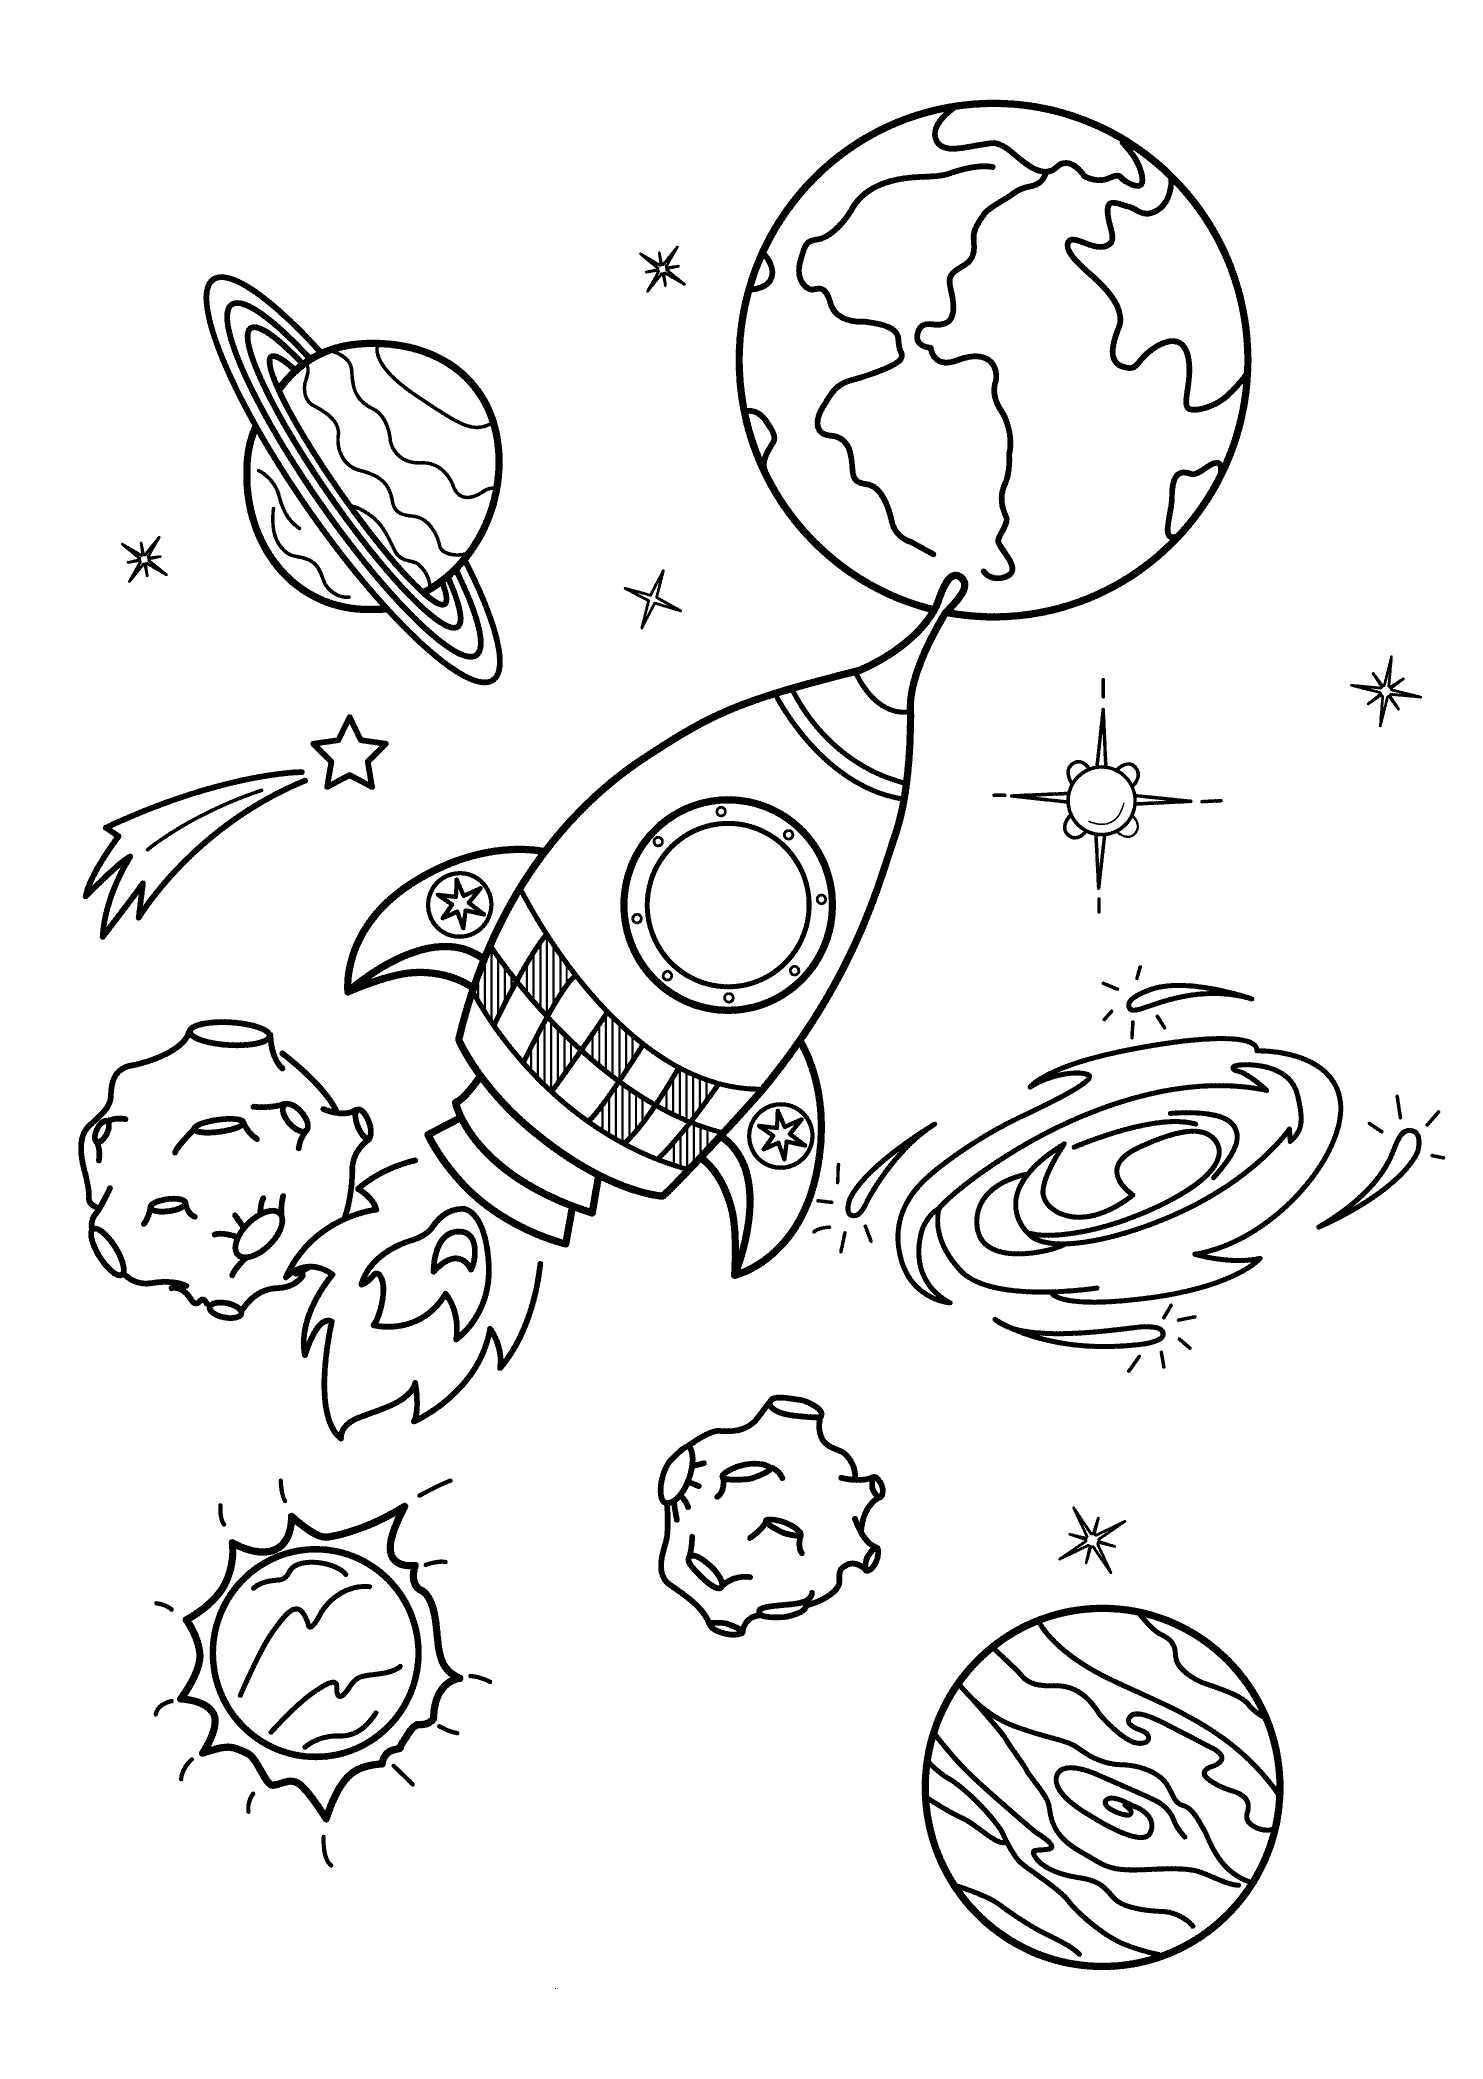 Galaxy Coloring Pages   Best Coloring Pages For Kids